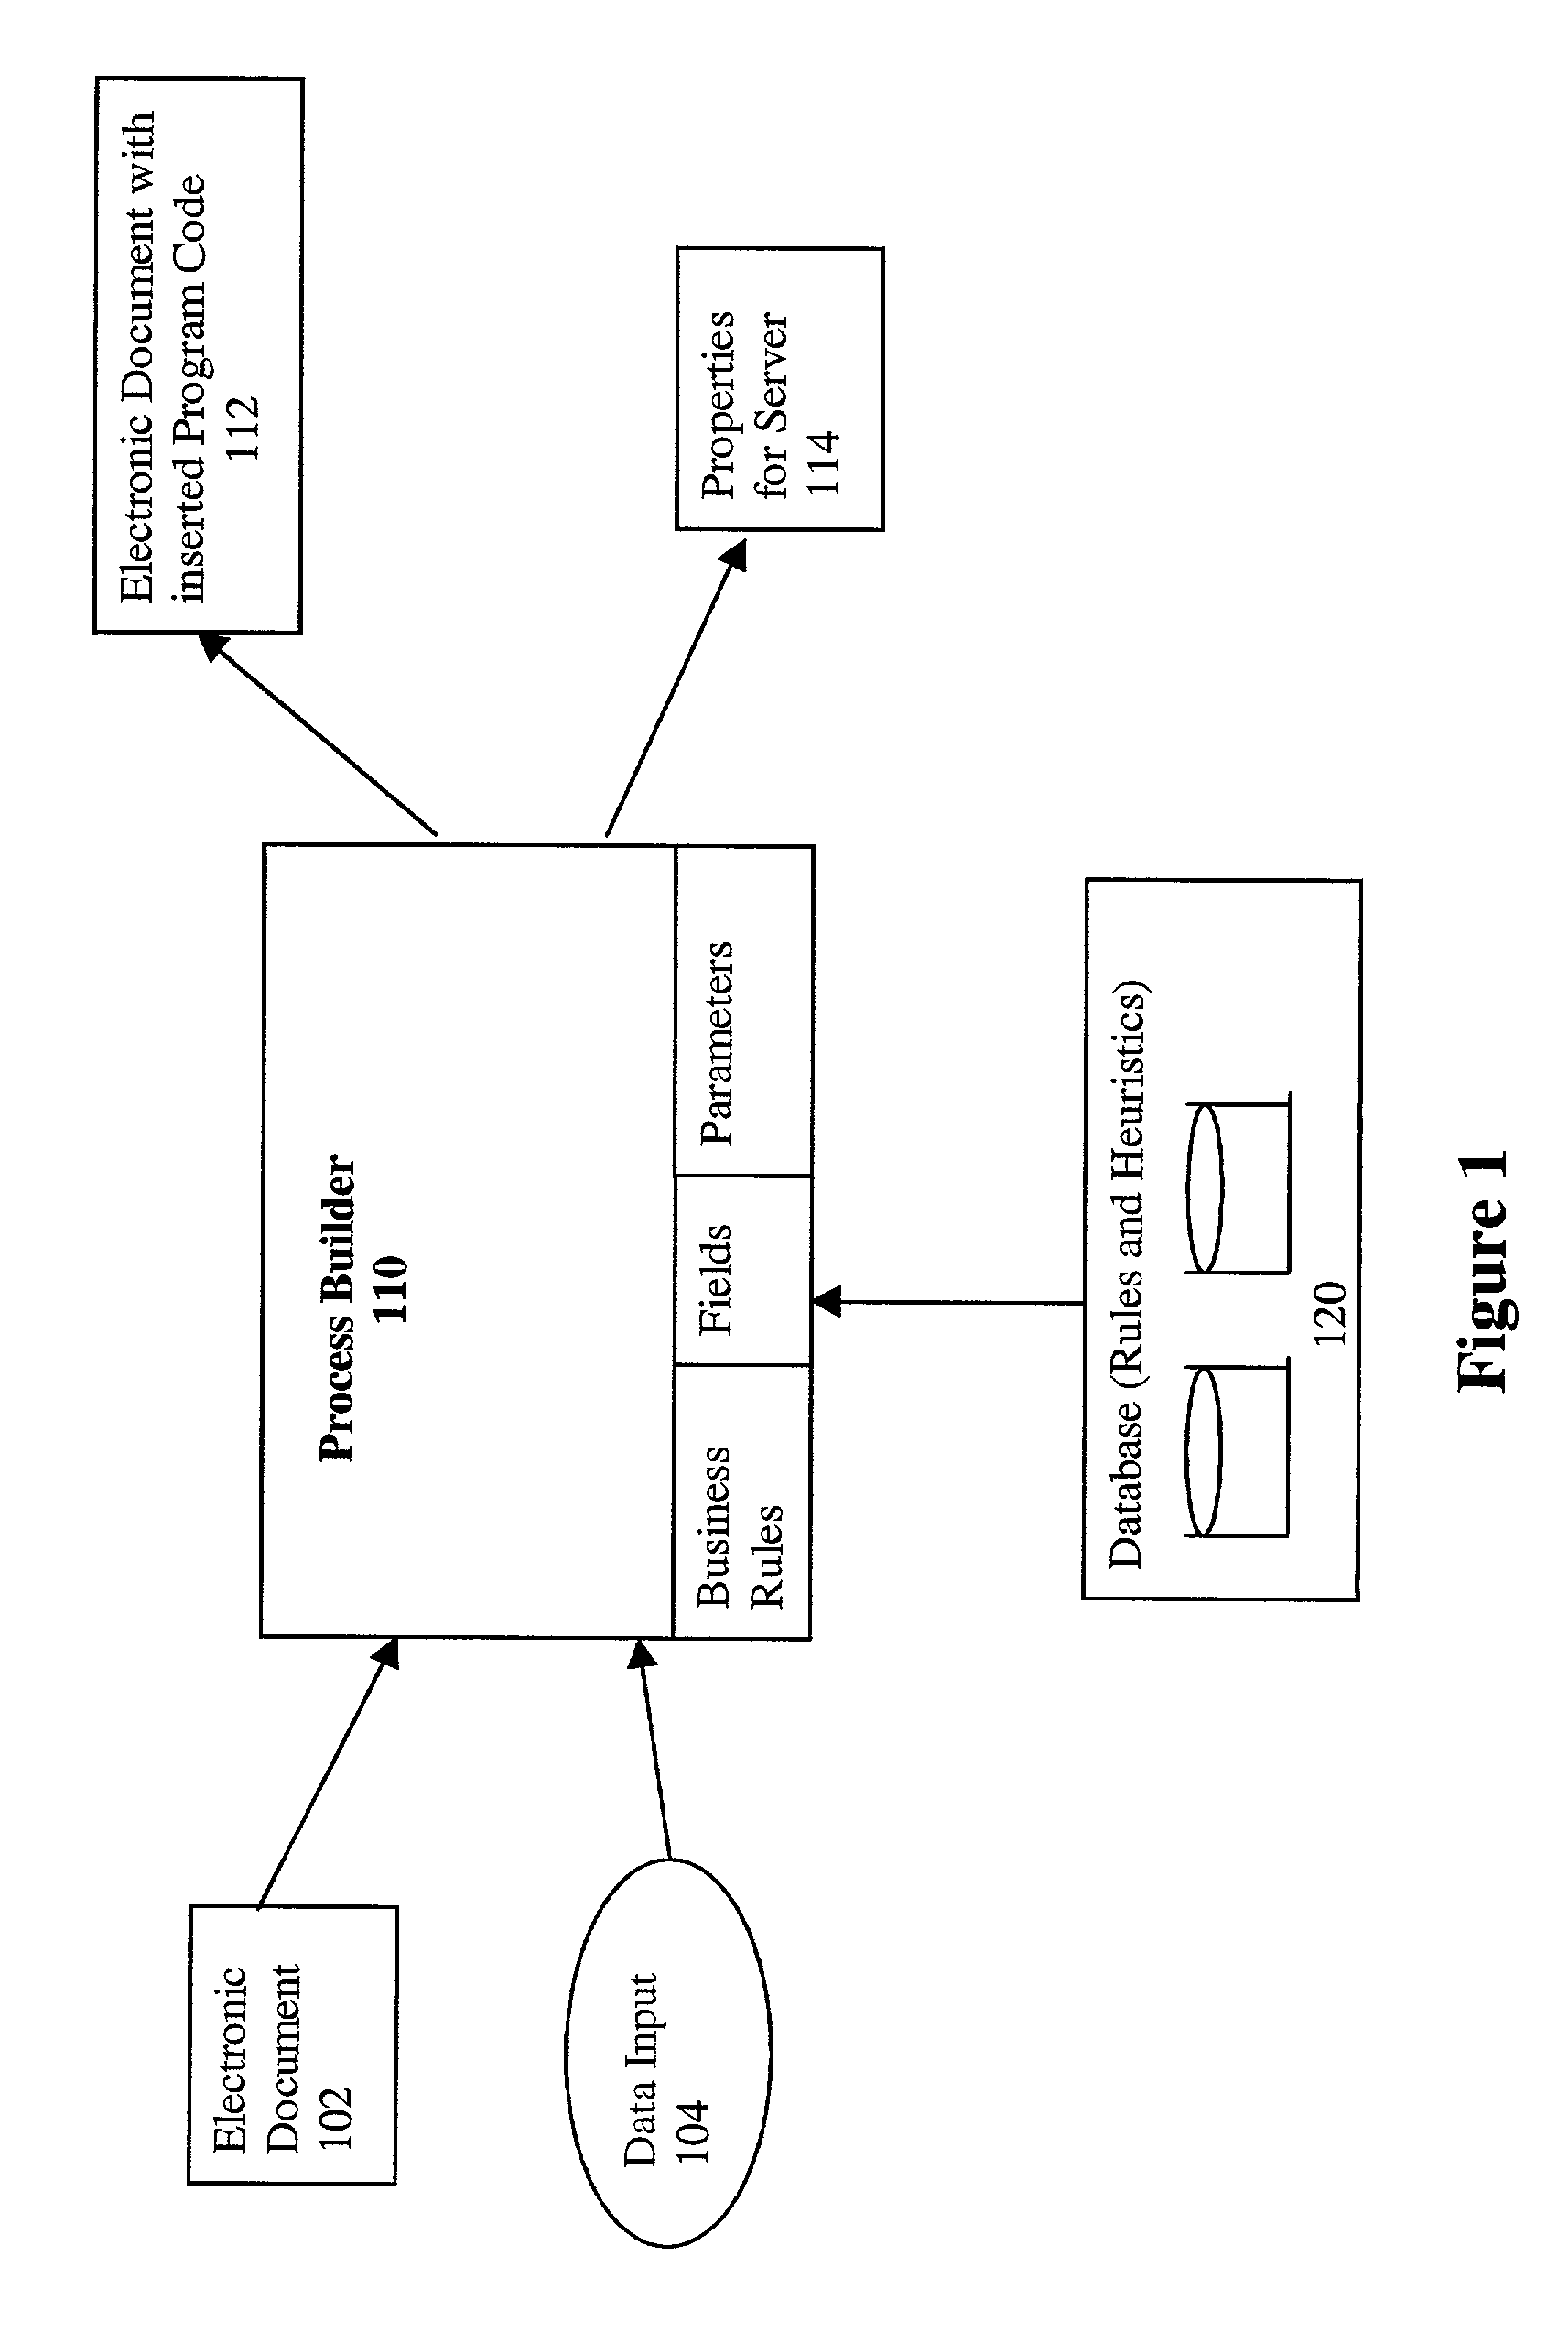 Process builder for a routable electronic document system and method for using the same